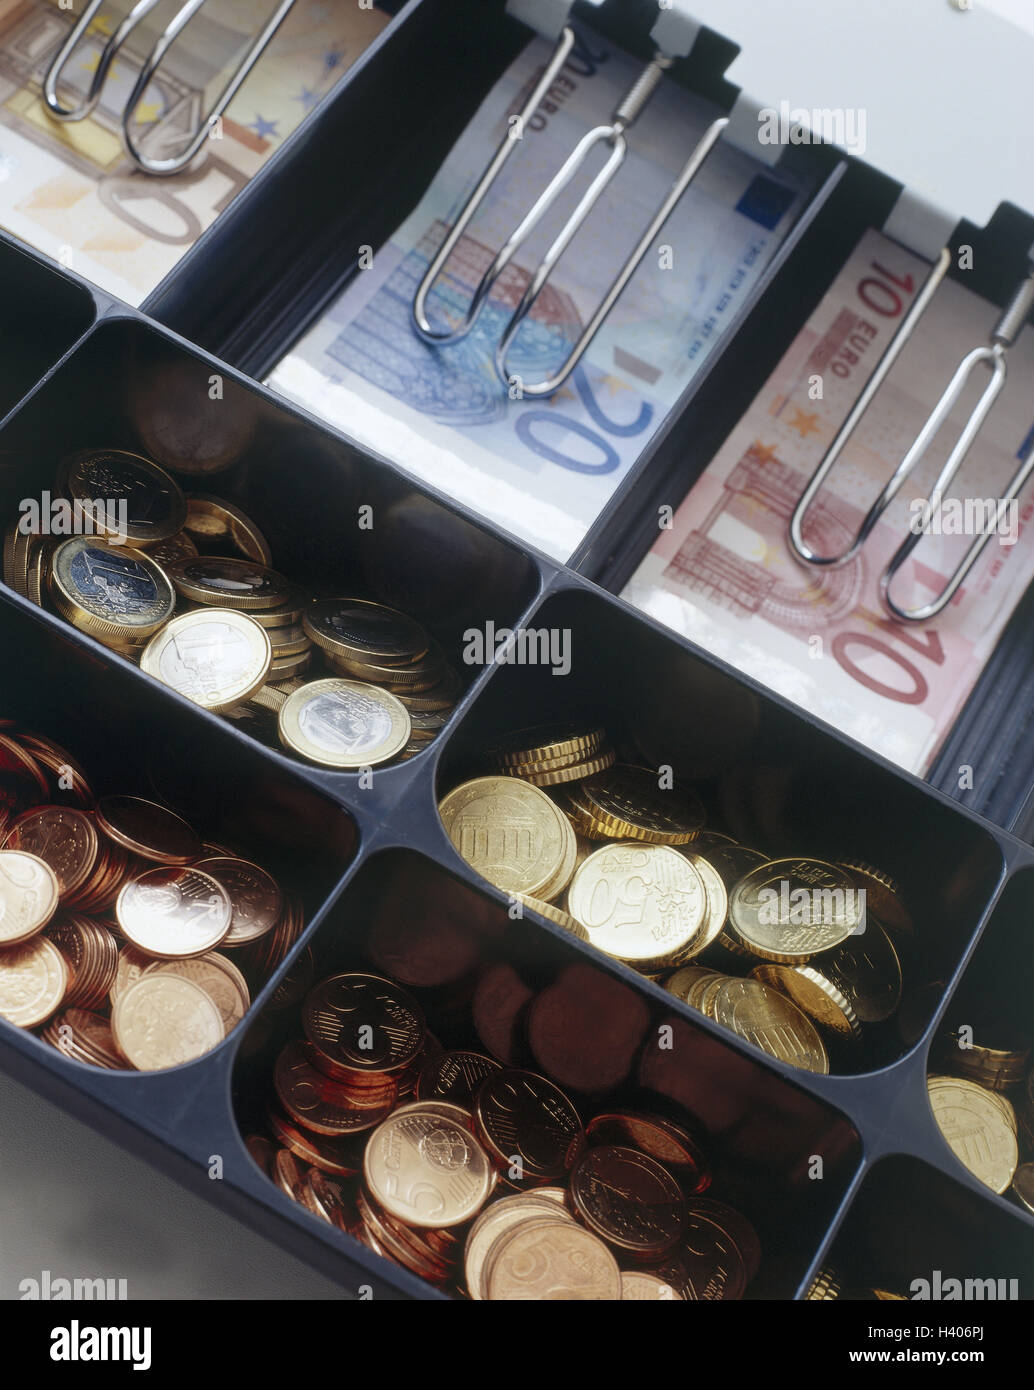 Cash box drawer, money, euro coins, euronotes, cash box, monetary cash box, cash register, opened, openly, cash, means payment, banknotes, monetary coins, coins, euro, fields, monetary fields, passed away, currency, Still life, product photography Stock Photo